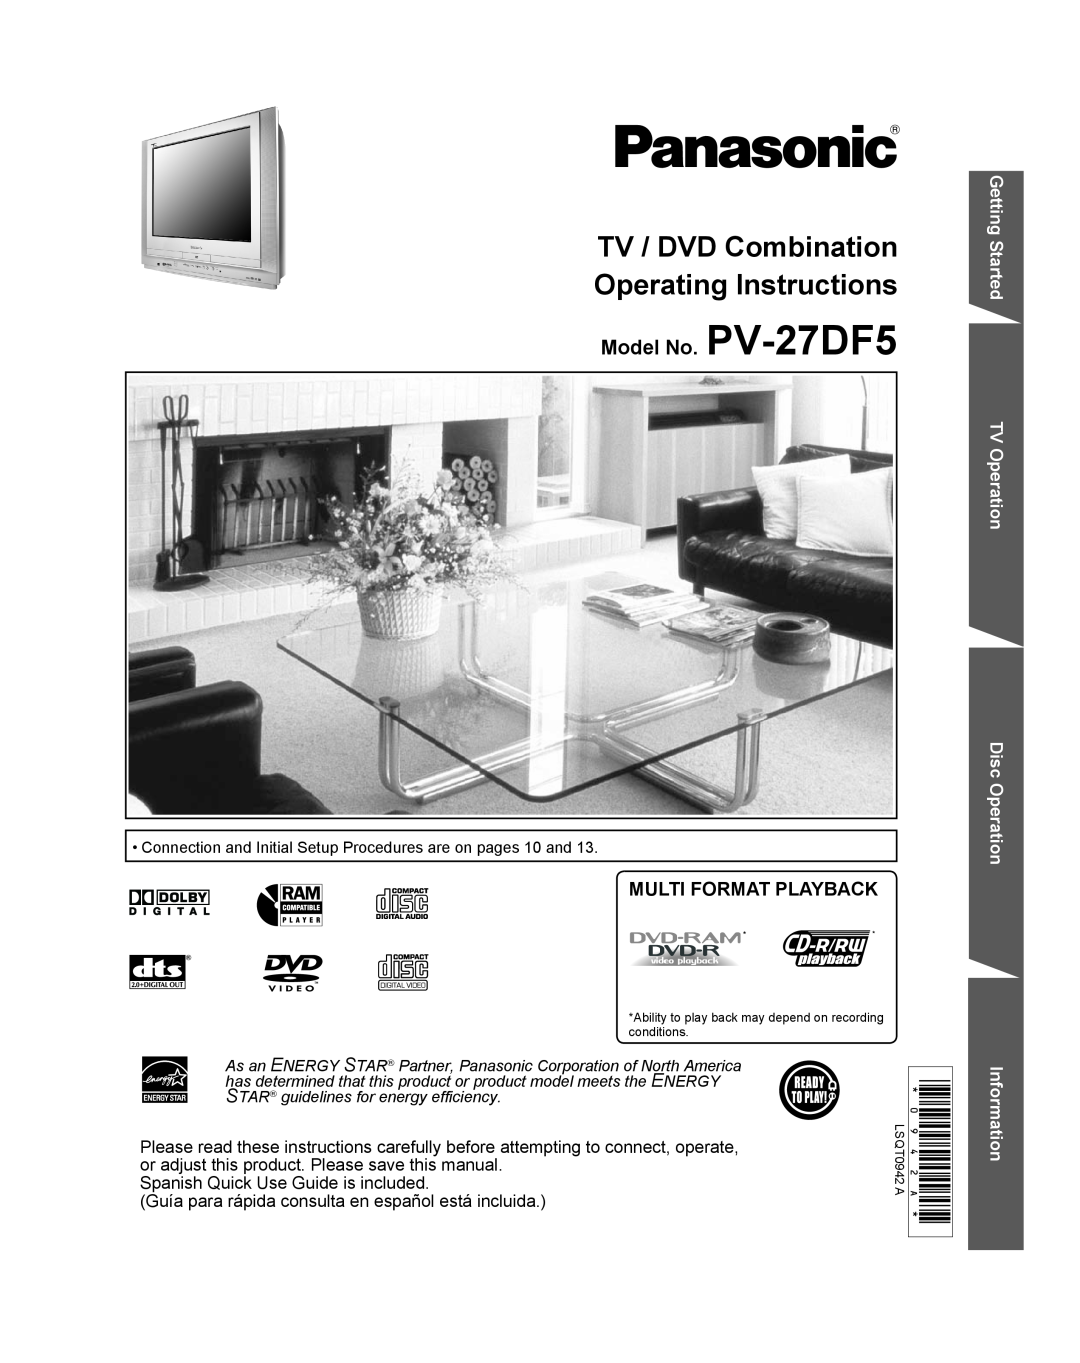 Panasonic PV-27DF5 manual Multi Format Playback, Getting Started TV Operation Disc Operation Information 